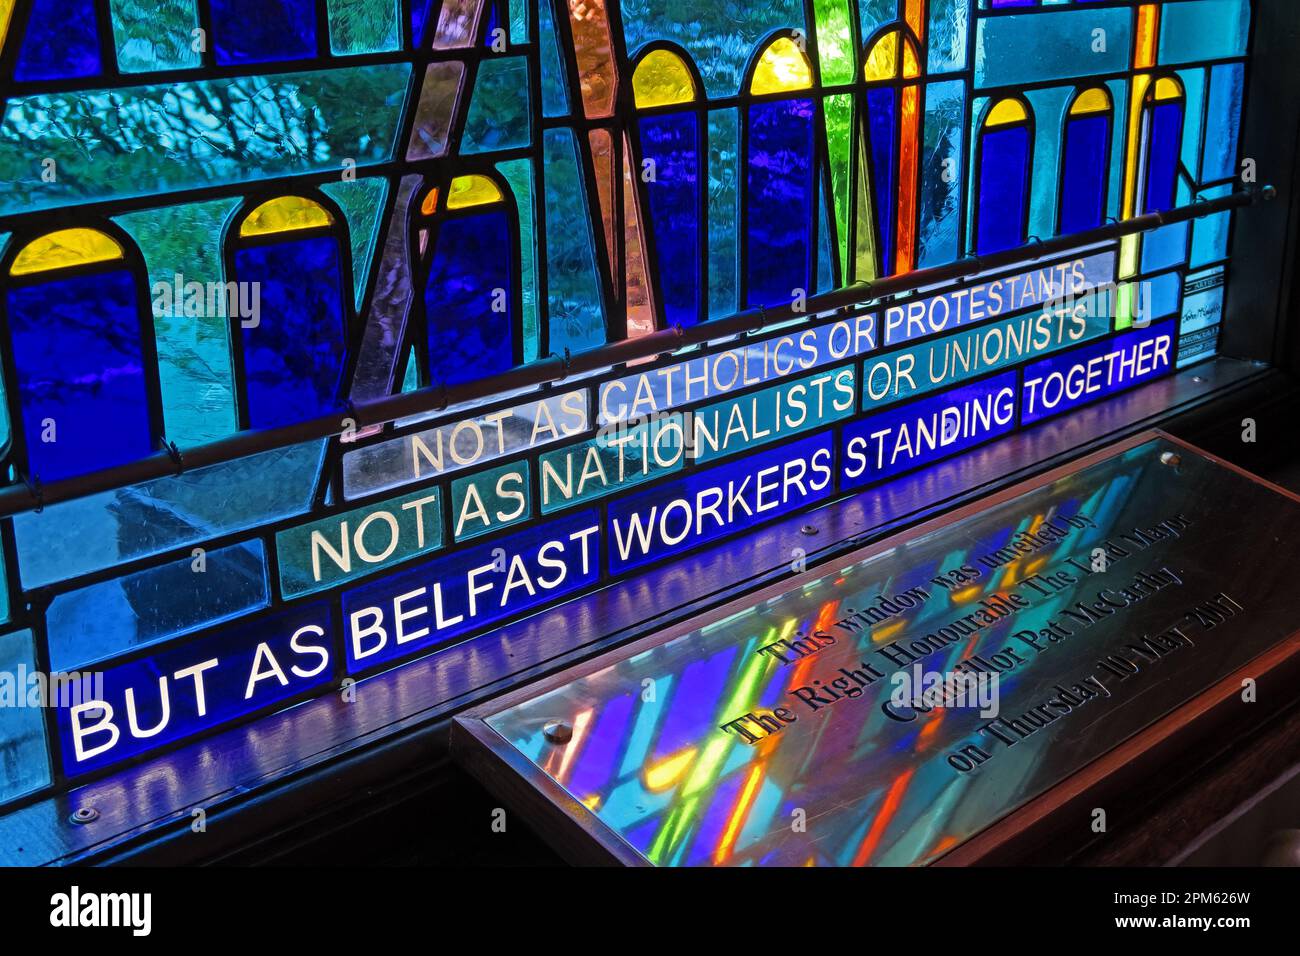 Belfast Workers standing together window, at Belfast City Hall, Donegall Square North, Belfast, Antrim, Northern Ireland, UK,  BT1 5GS Stock Photo